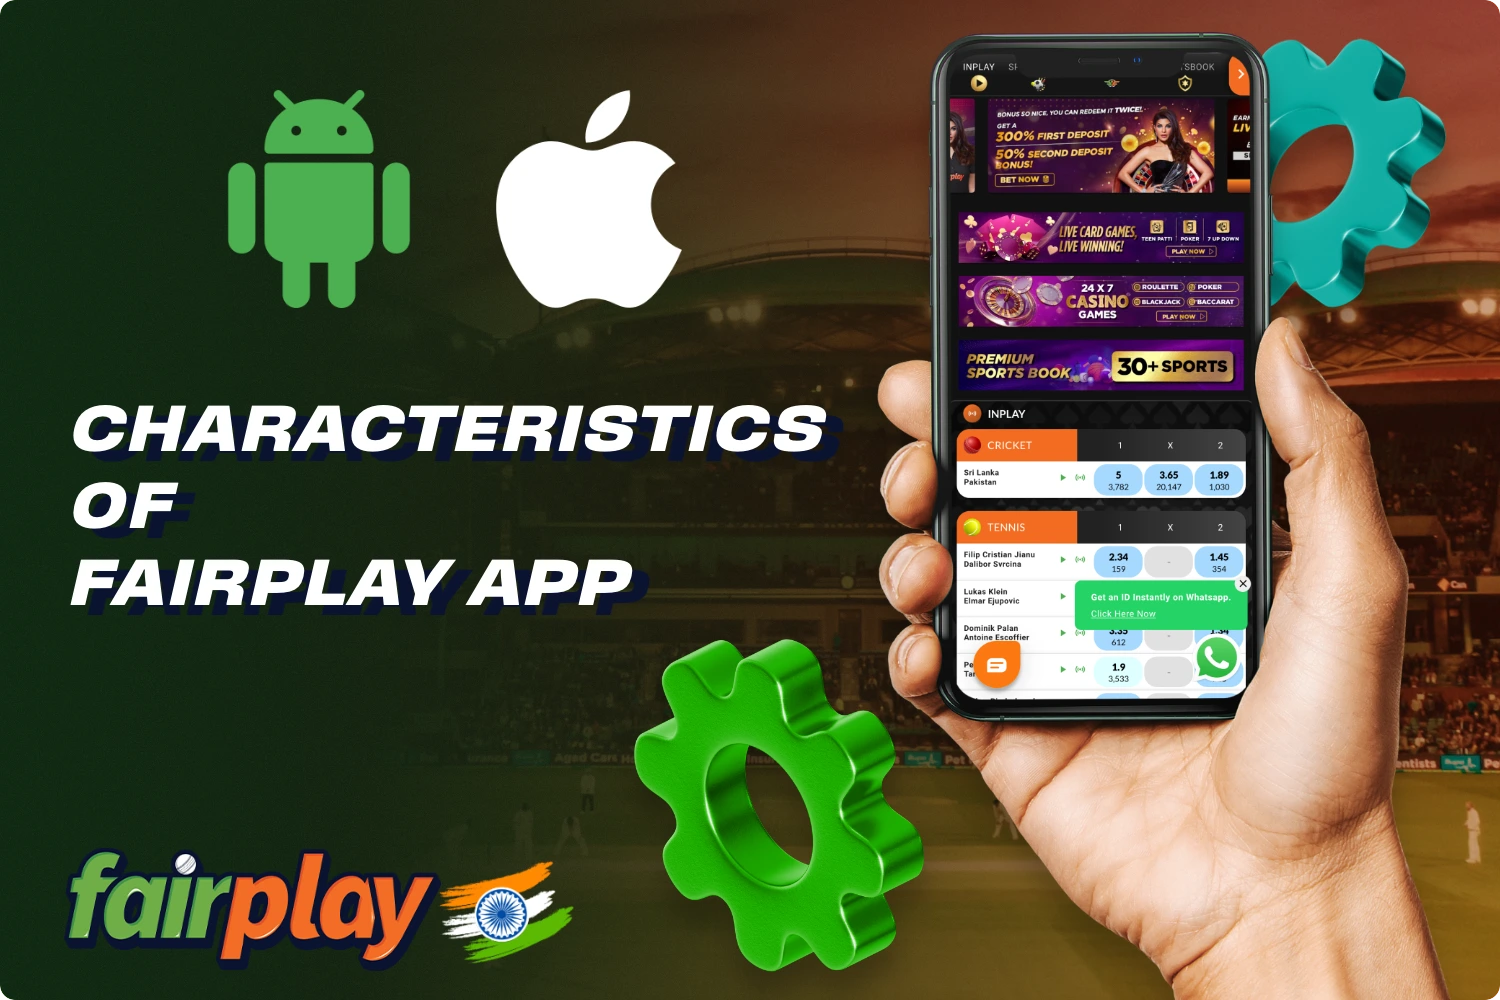 The characteristics of the Fairplay app are so low demanding that it can be installed on almost all modern devices